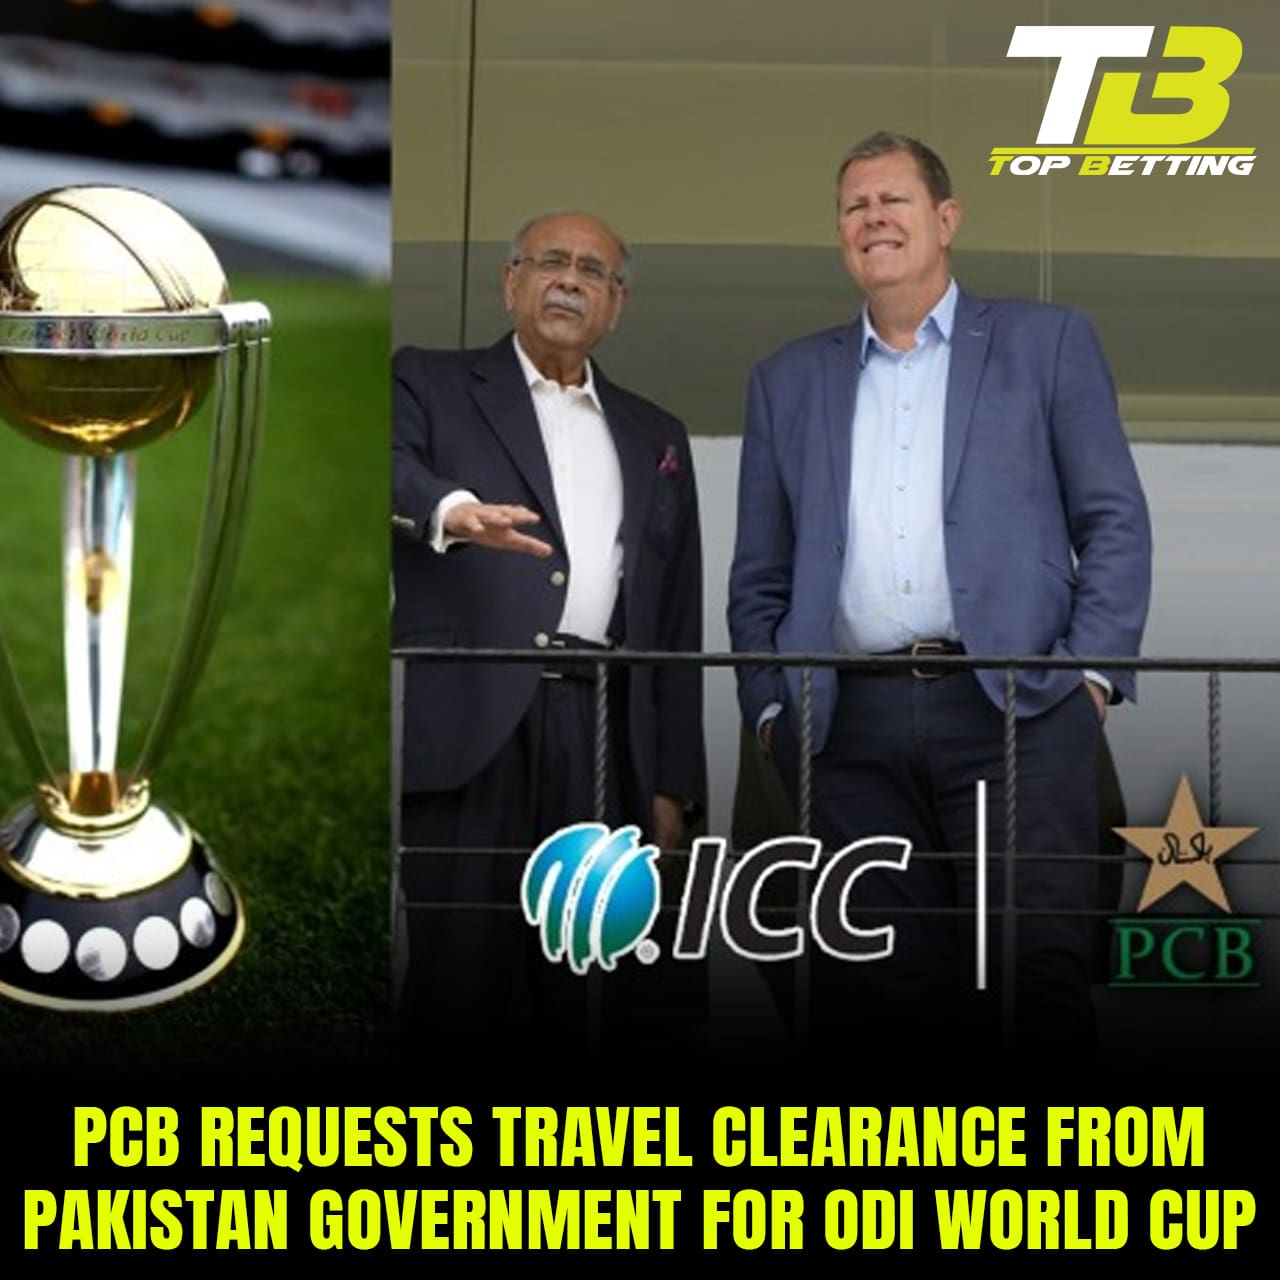 PCB Requests Travel Clearance from Pakistan Government for ODI World Cup